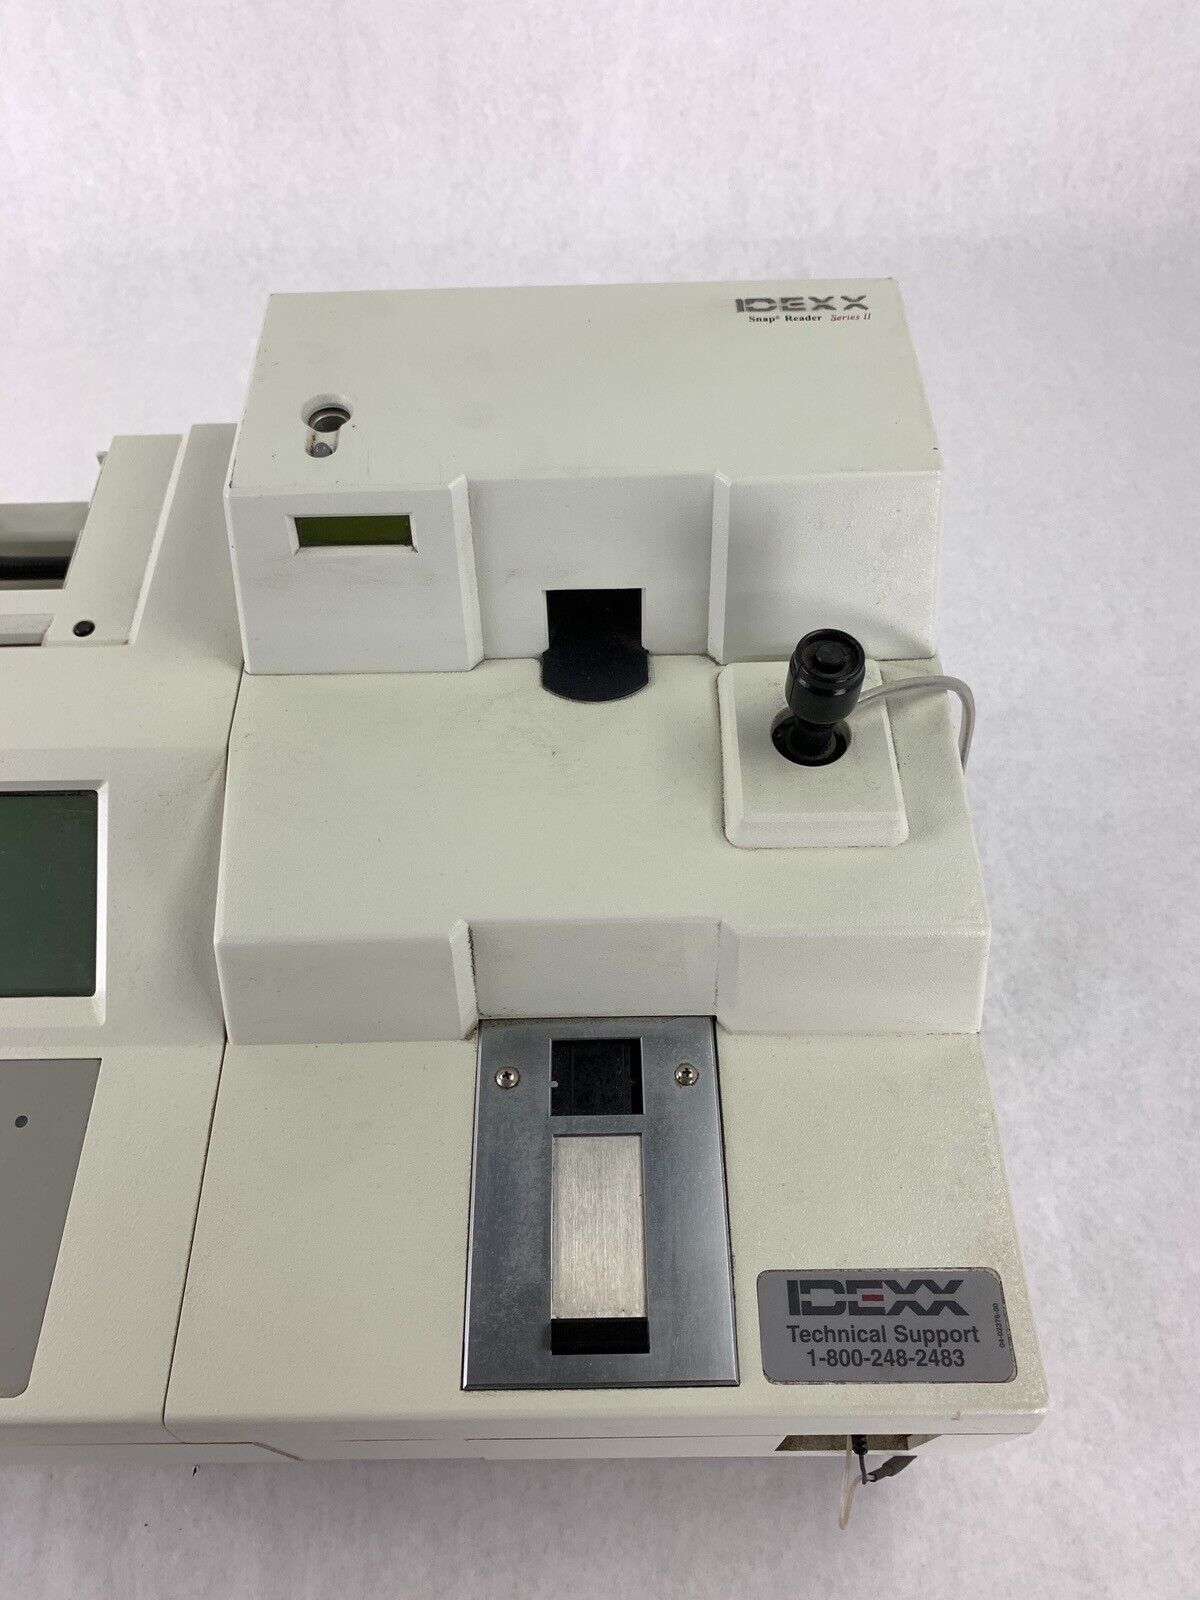 IDEXX Vet Test 8008 Veterinary Chemistry Analyzer For Parts and Repair